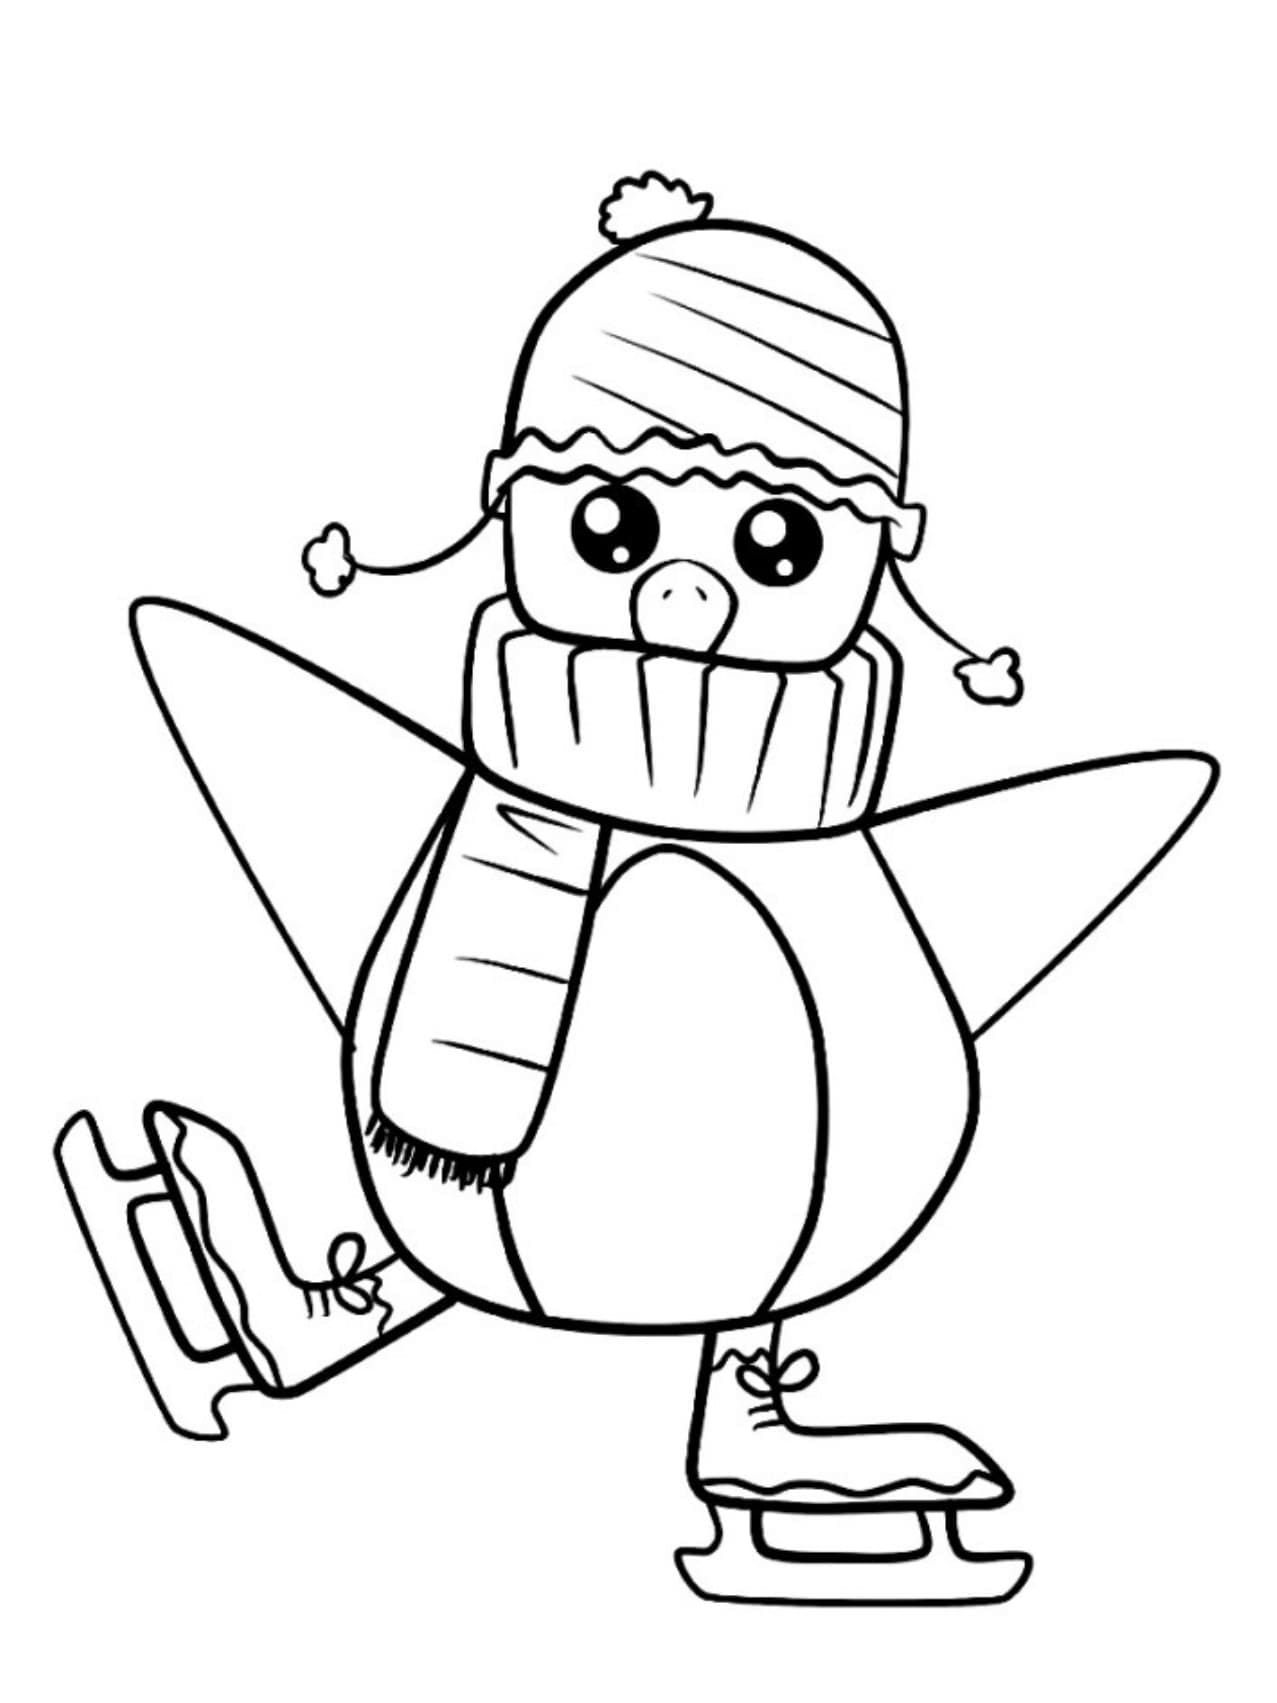 Coloriage Pingouin Imprimable